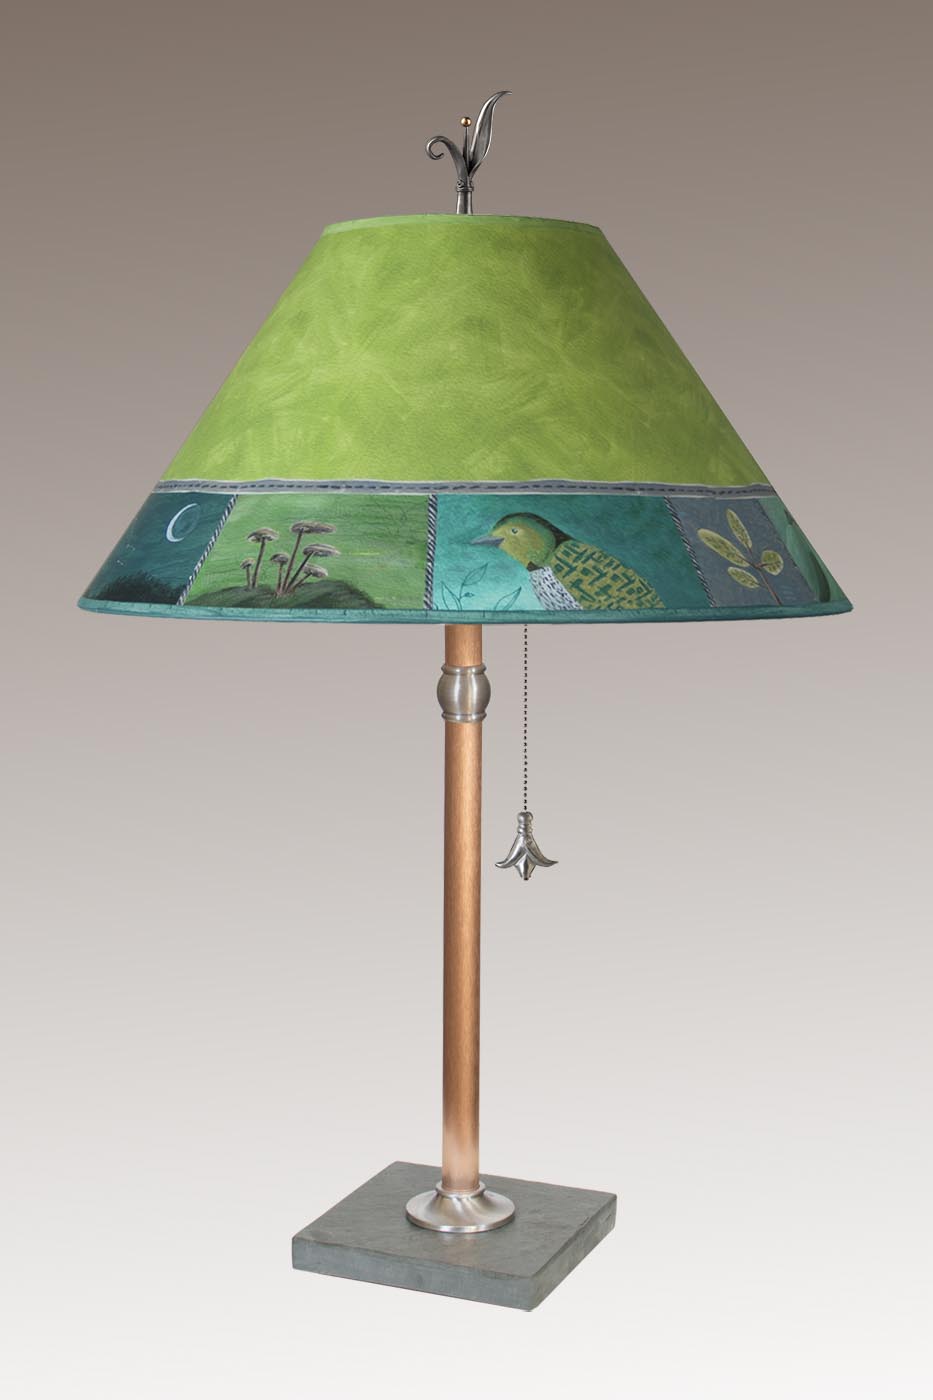 Janna Ugone & Co Table Lamp Copper Table Lamp with Large Conical Shade in Woodland Trails in Leaf